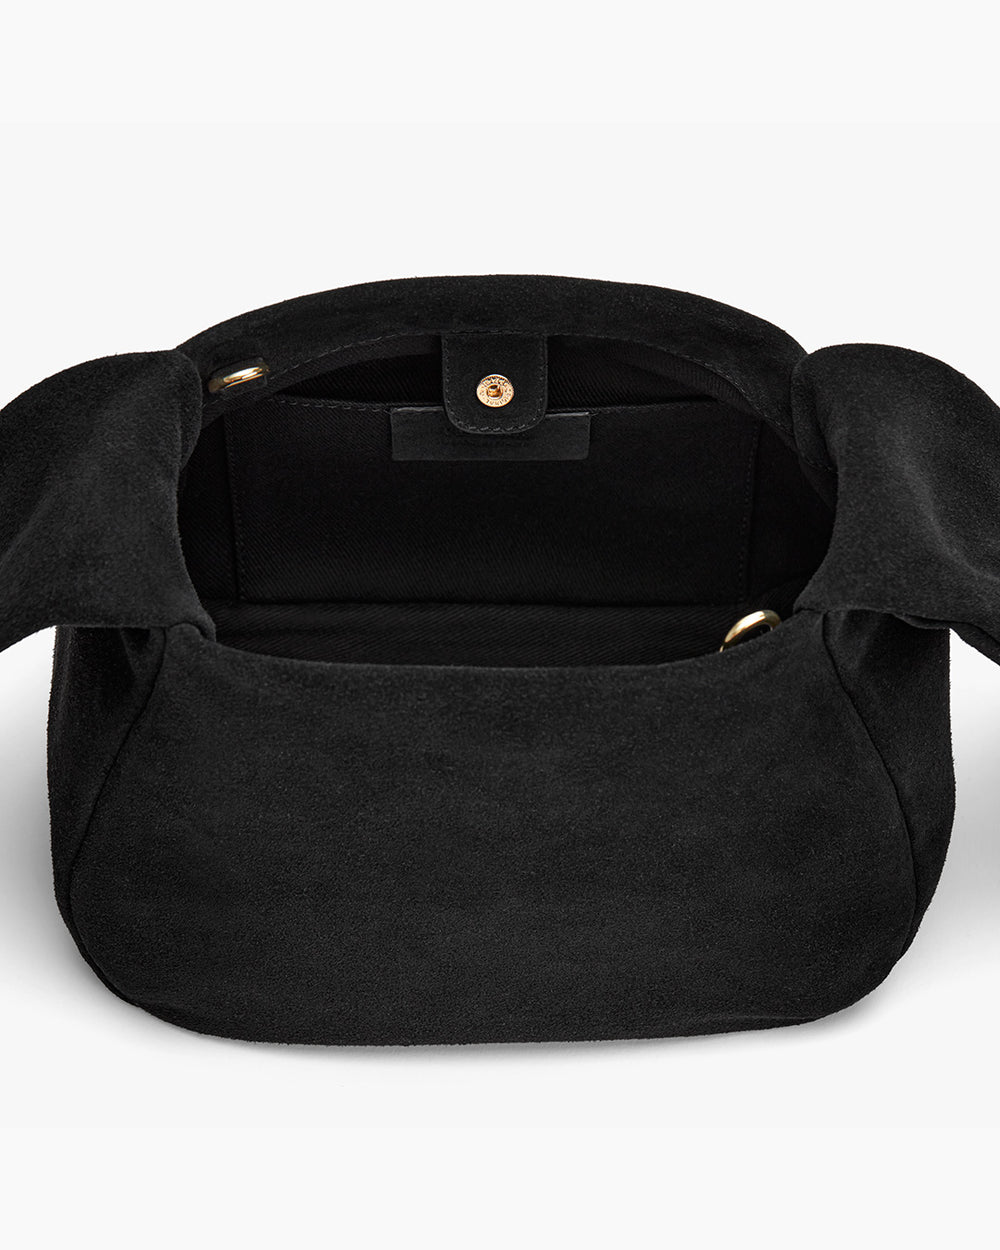 Open handbag viewed from the top showing inner compartment.